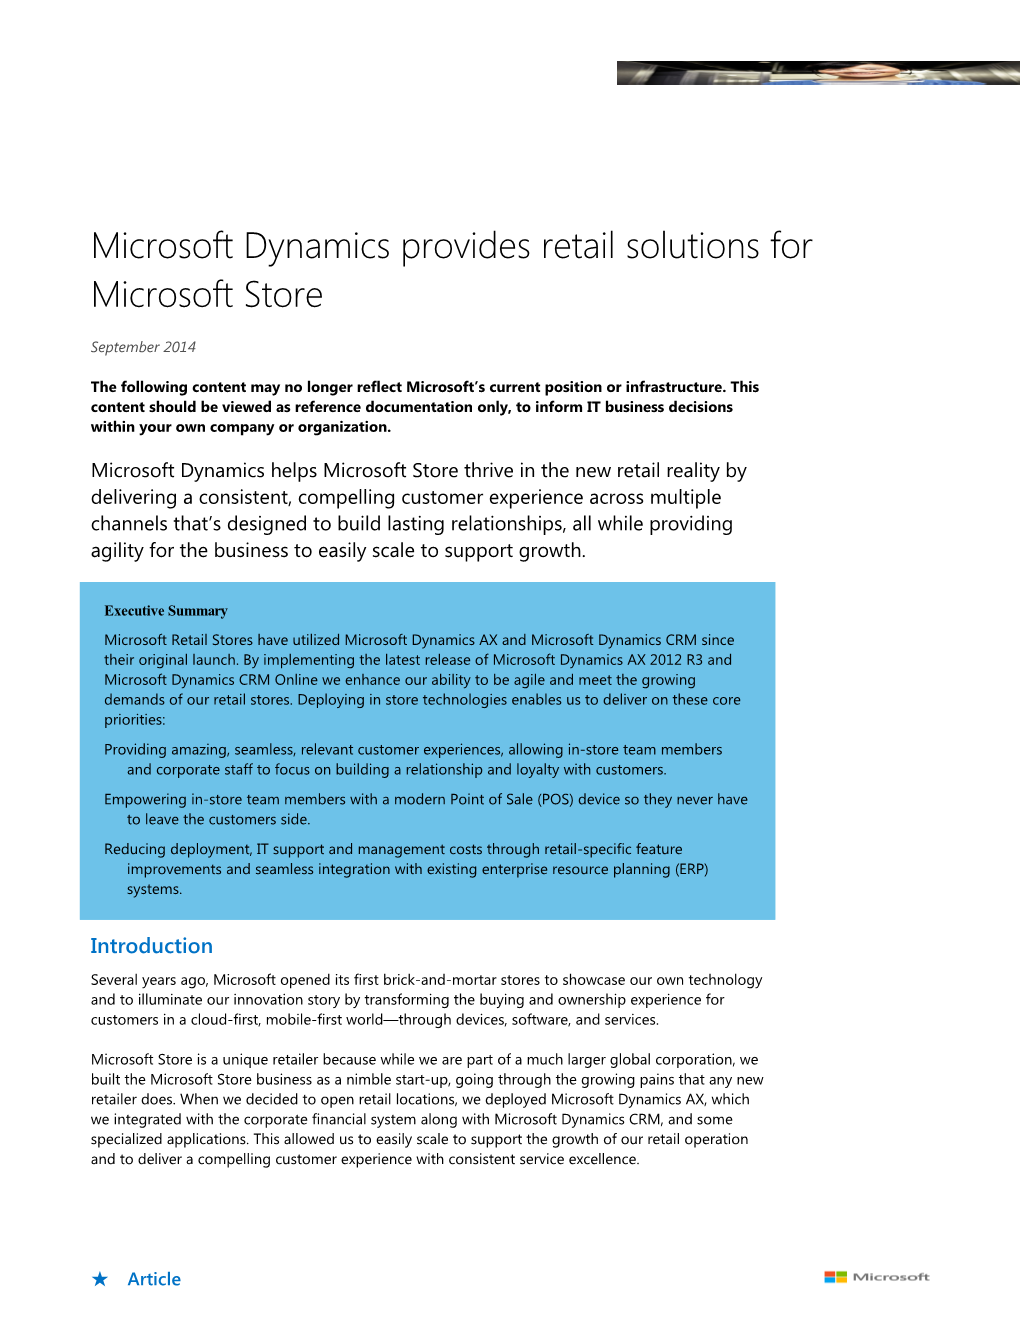 Microsoft Dynamics Provides Retail Solutions for Microsoft Store